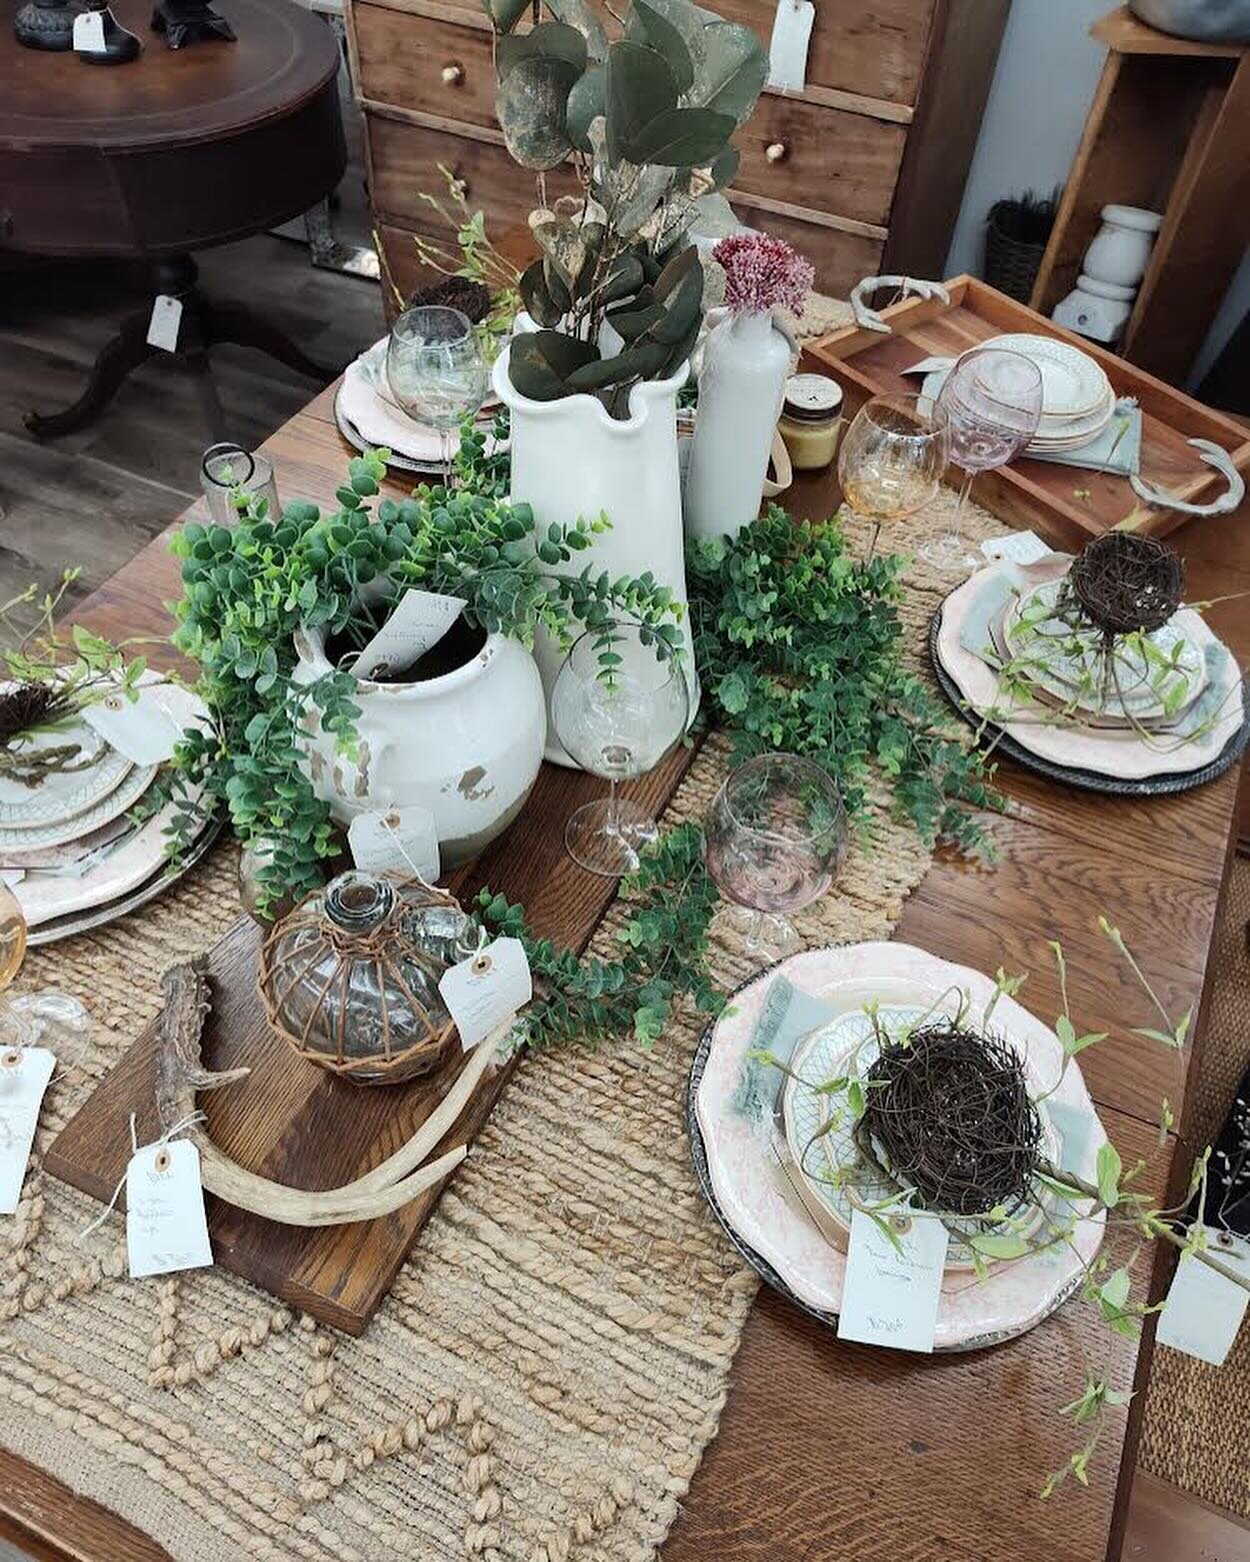 🎉 Spring Equinox has officially started and we are giddy with excitement to share our wonderful Easter Decor with you this week!!

Buford has a fantastic selection of Easter goodies, new and old, to help keep your home warm and inviting for YOU and 